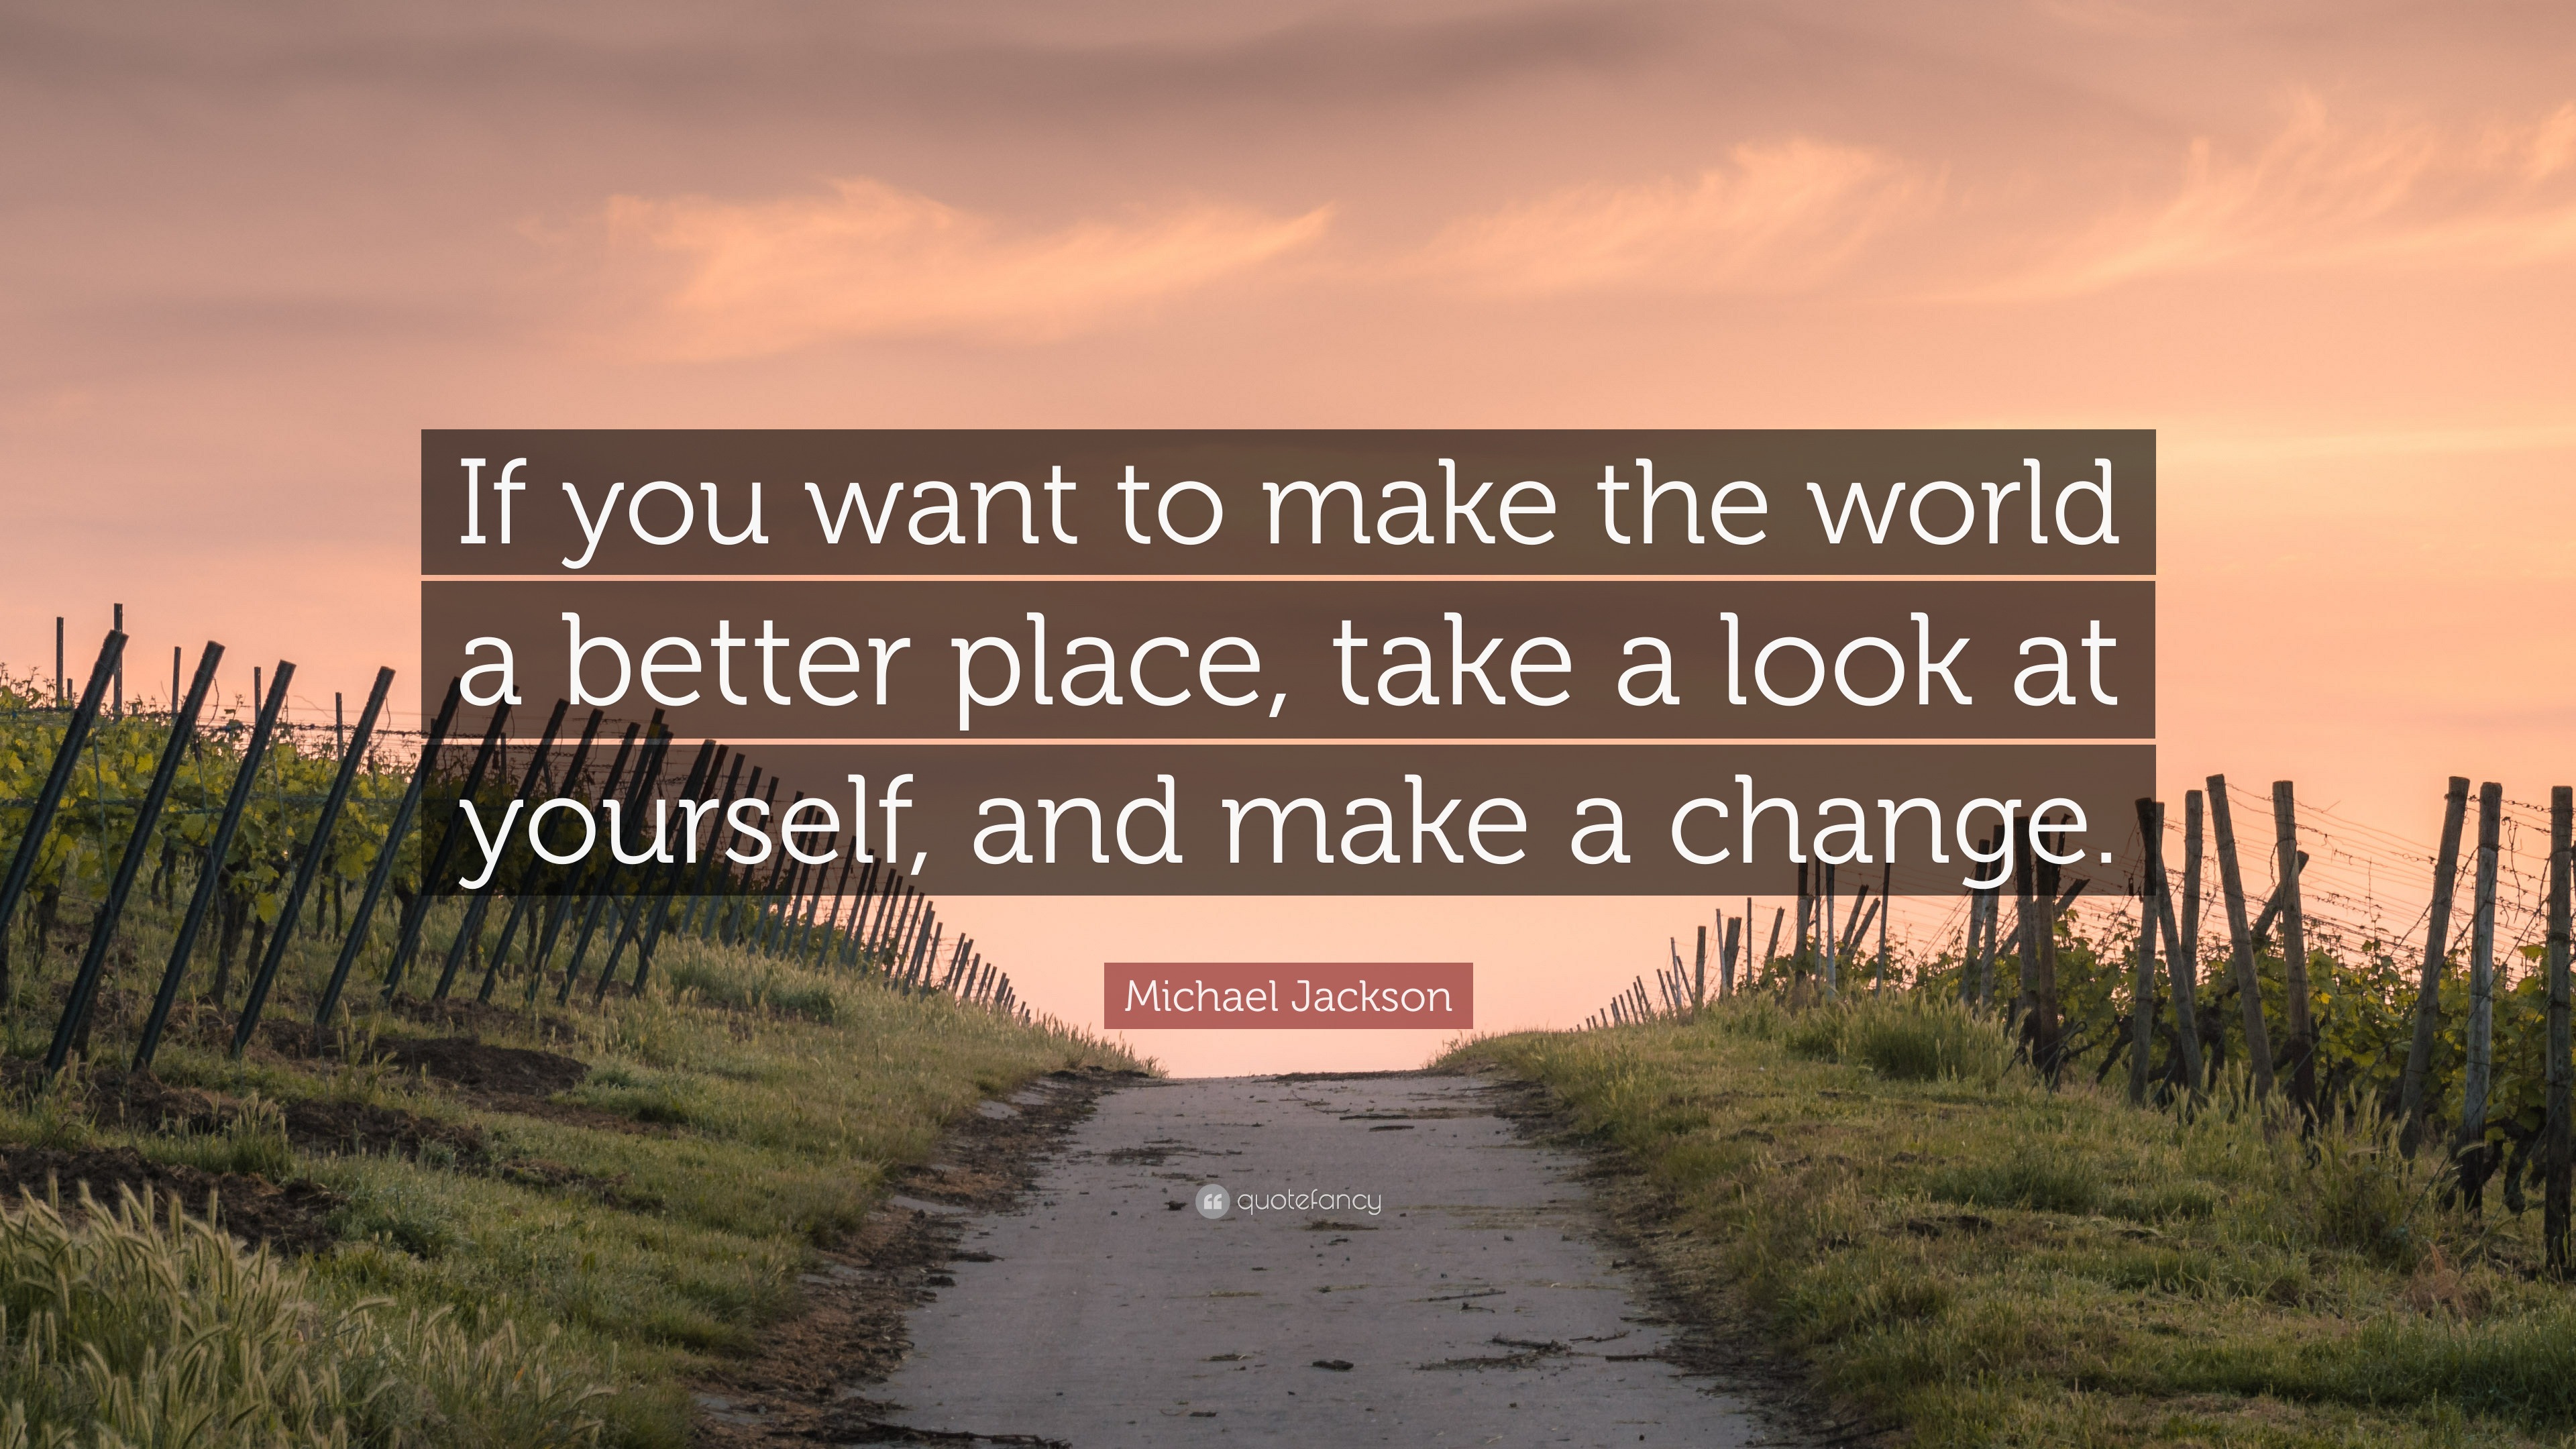 Michael Jackson Quote “If you want to make the world a better place